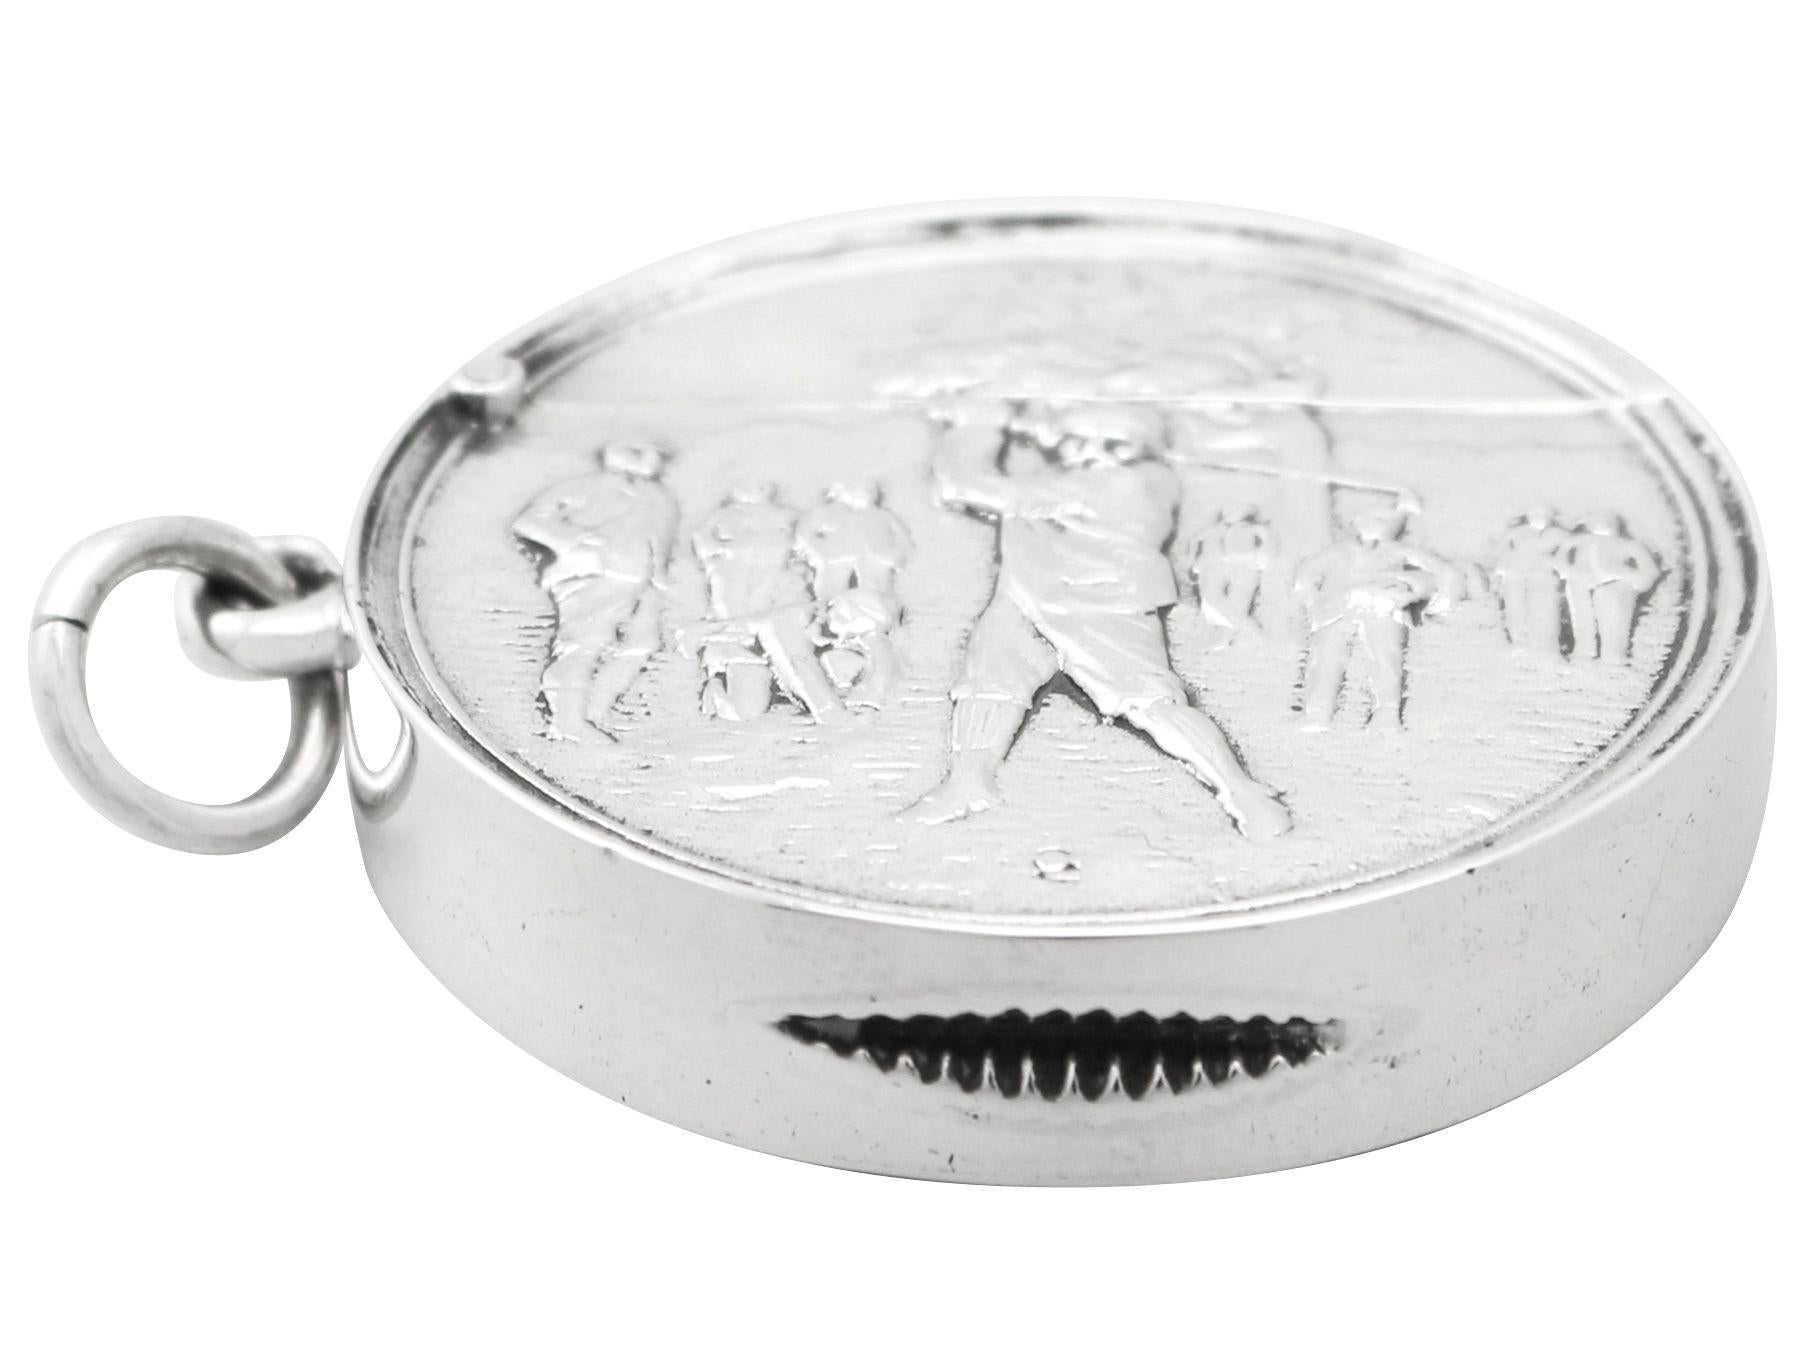 A fine and impressive antique Edwardian English sterling silver vesta case with golfing interest; an addition to our sports related silverware collection.

This fine antique Edwardian English sterling silver vesta case has a plain circular